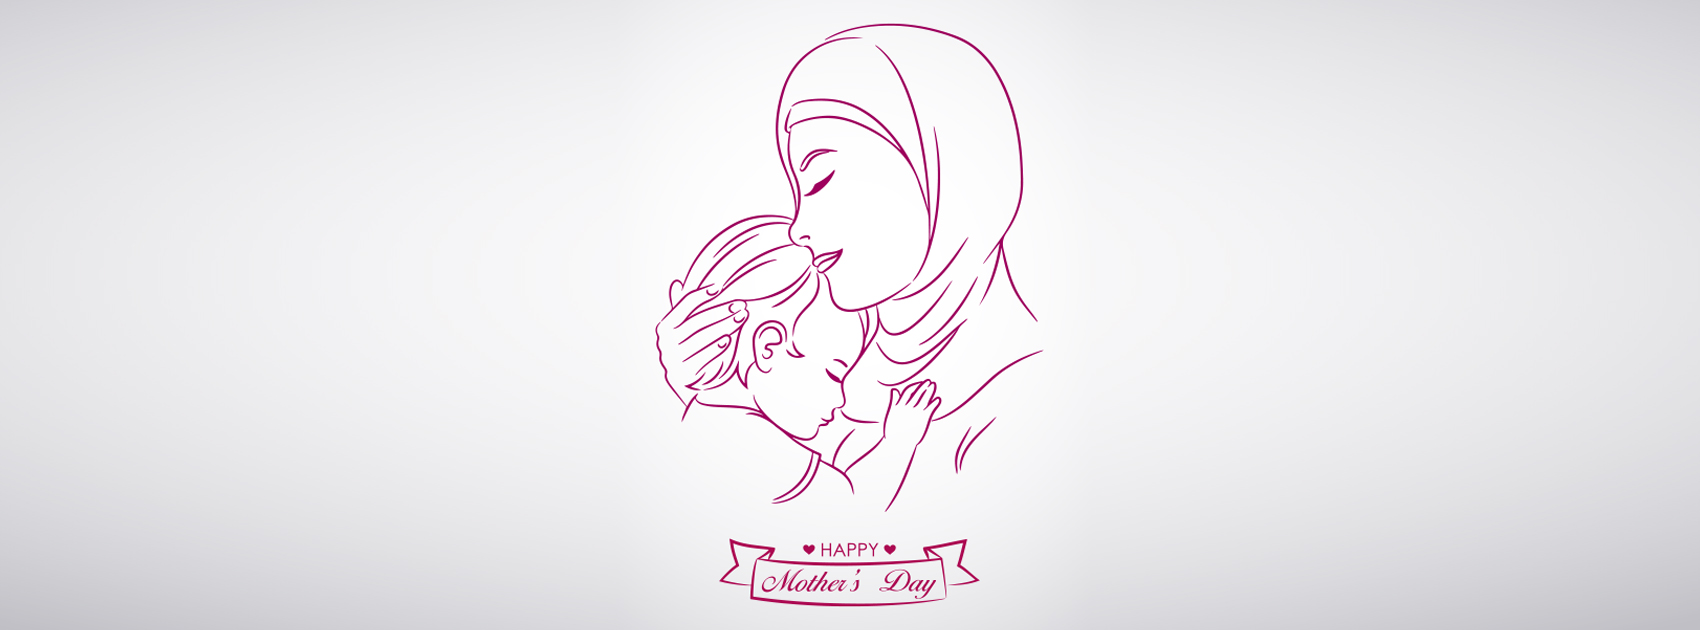 Best Mother’s Day Campaigns,Mothers Day Campaigns 2019,Mothers Day Marketing Campaigns,Startup Stories,2019 Motivational Stories,Mother's Day Campaign Ideas,5 Best Mother's Day Campaign,Importance of Mother’s Day,#MothersDay2019